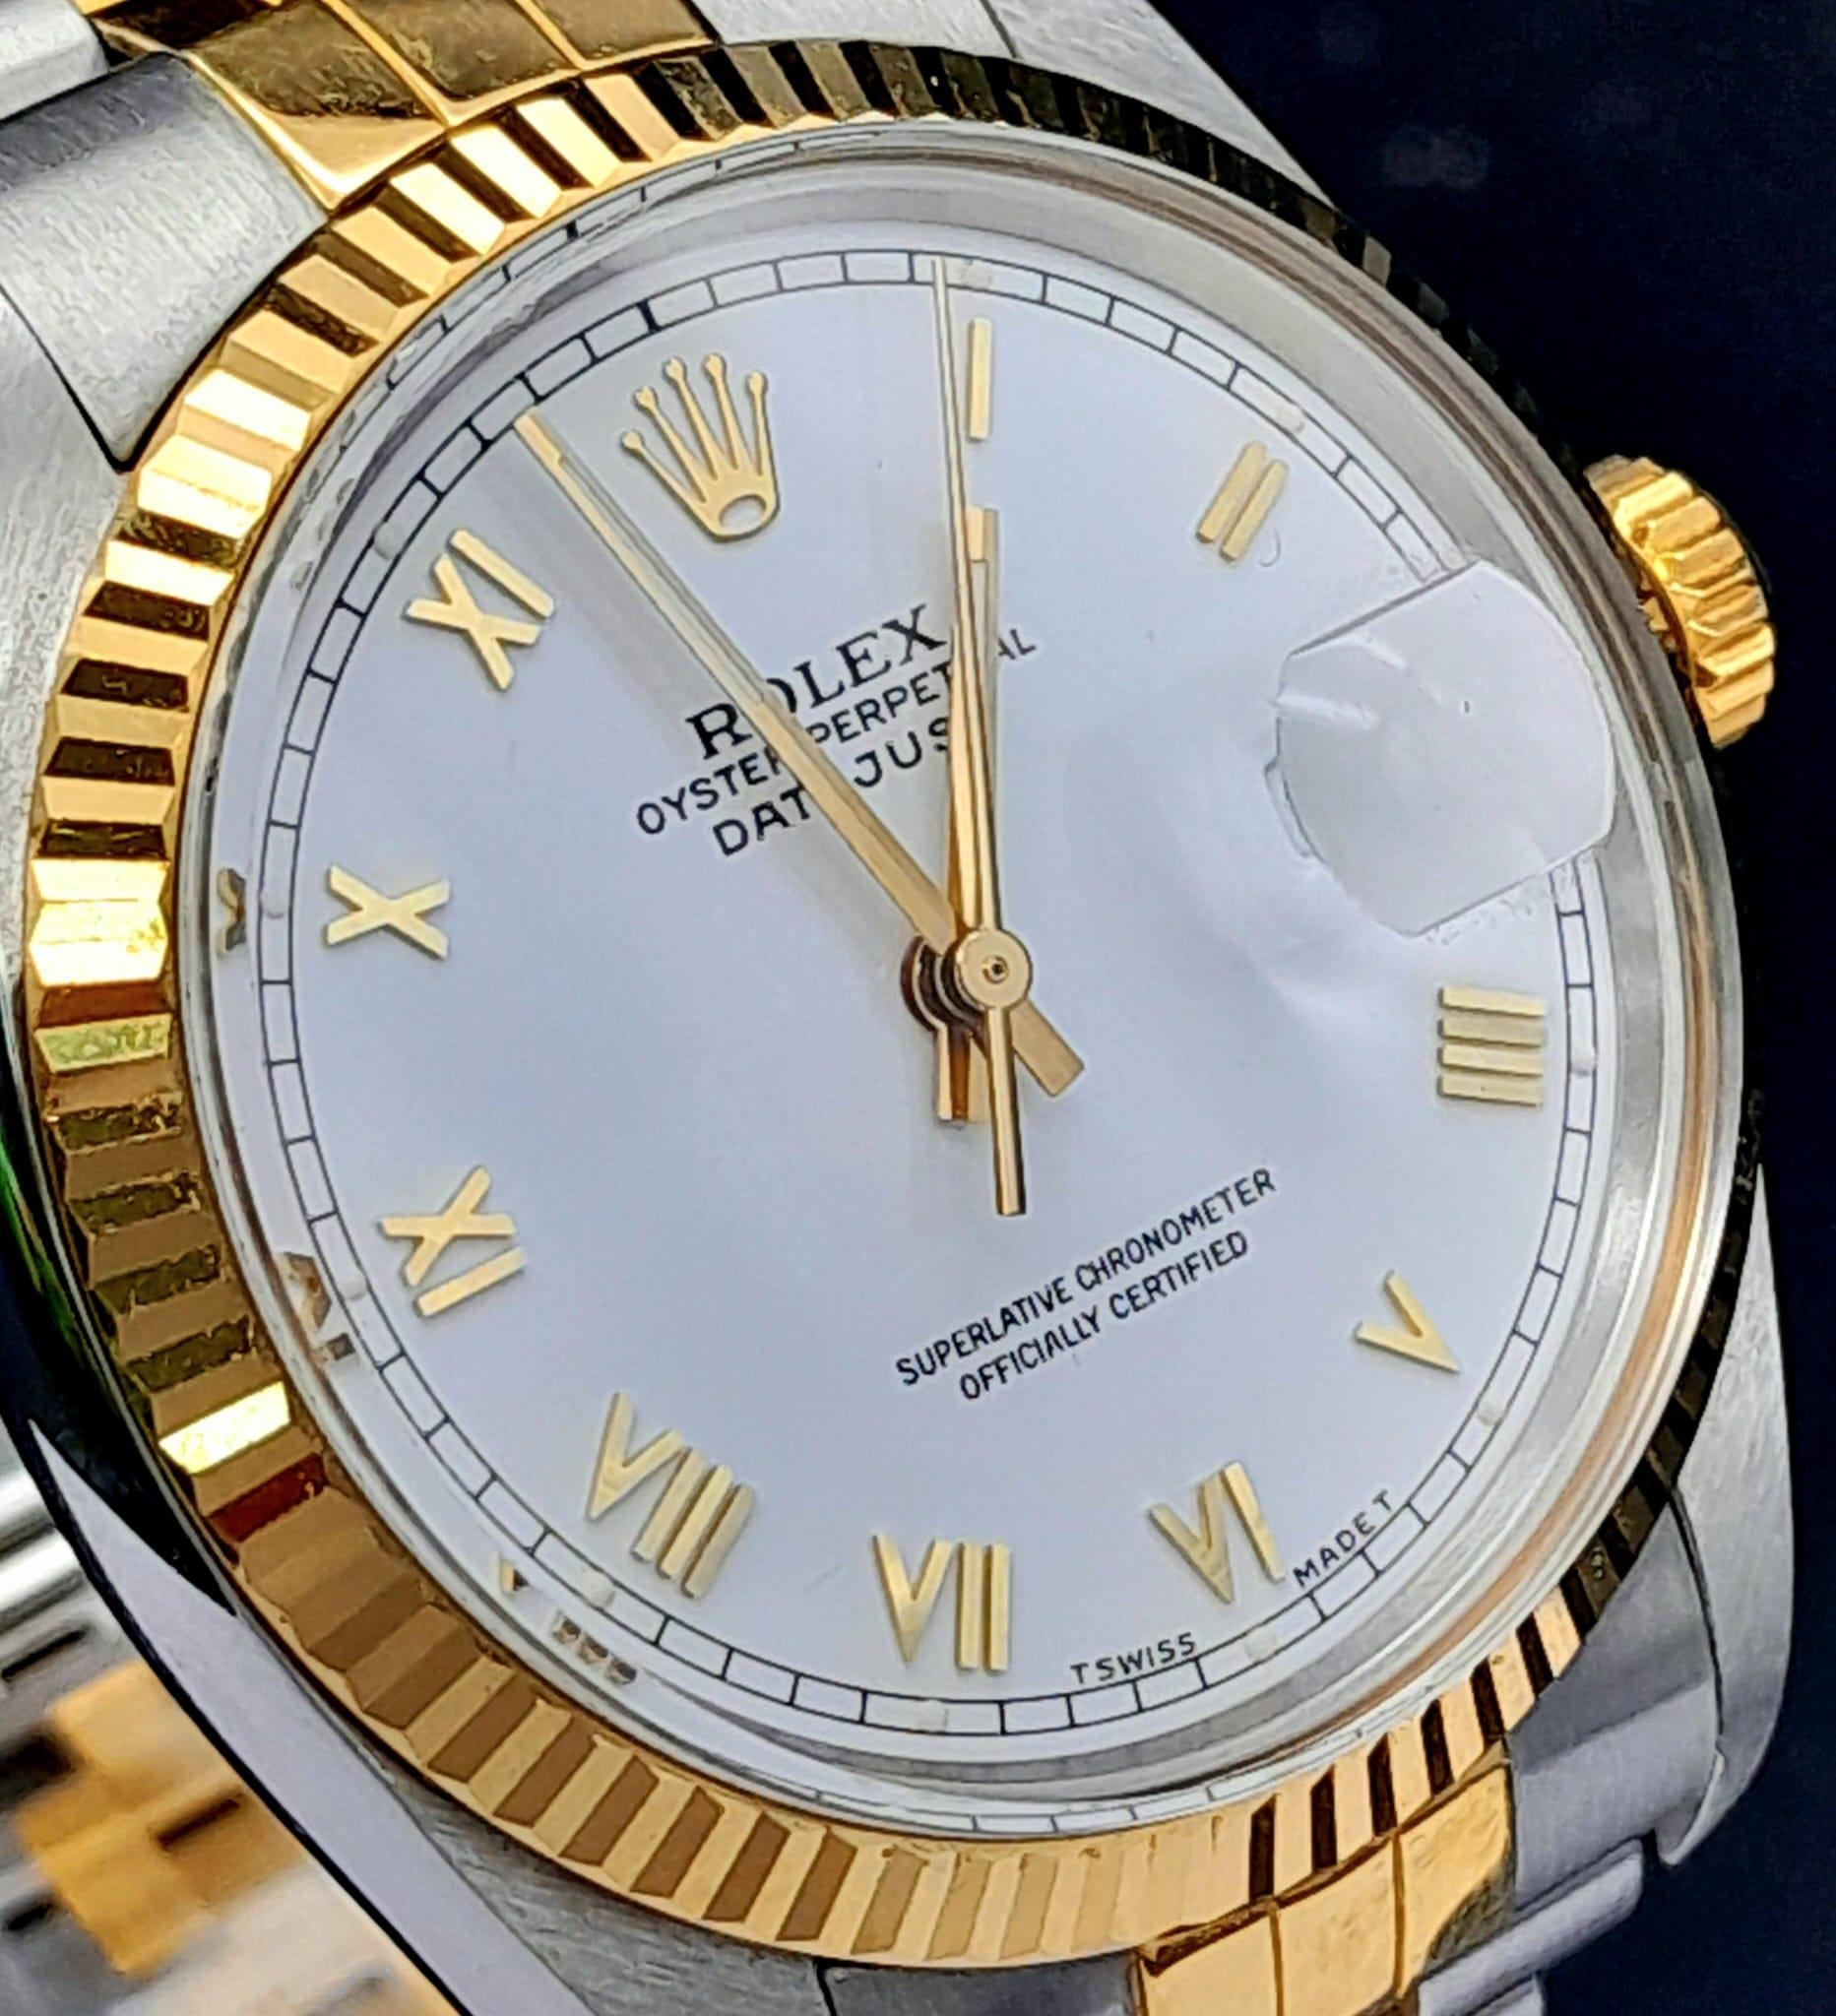 A Bi-Metal Rolex Oyster Perpetual Datejust Gents Watch. Gold and stainless steel bracelet and case - - Image 3 of 12